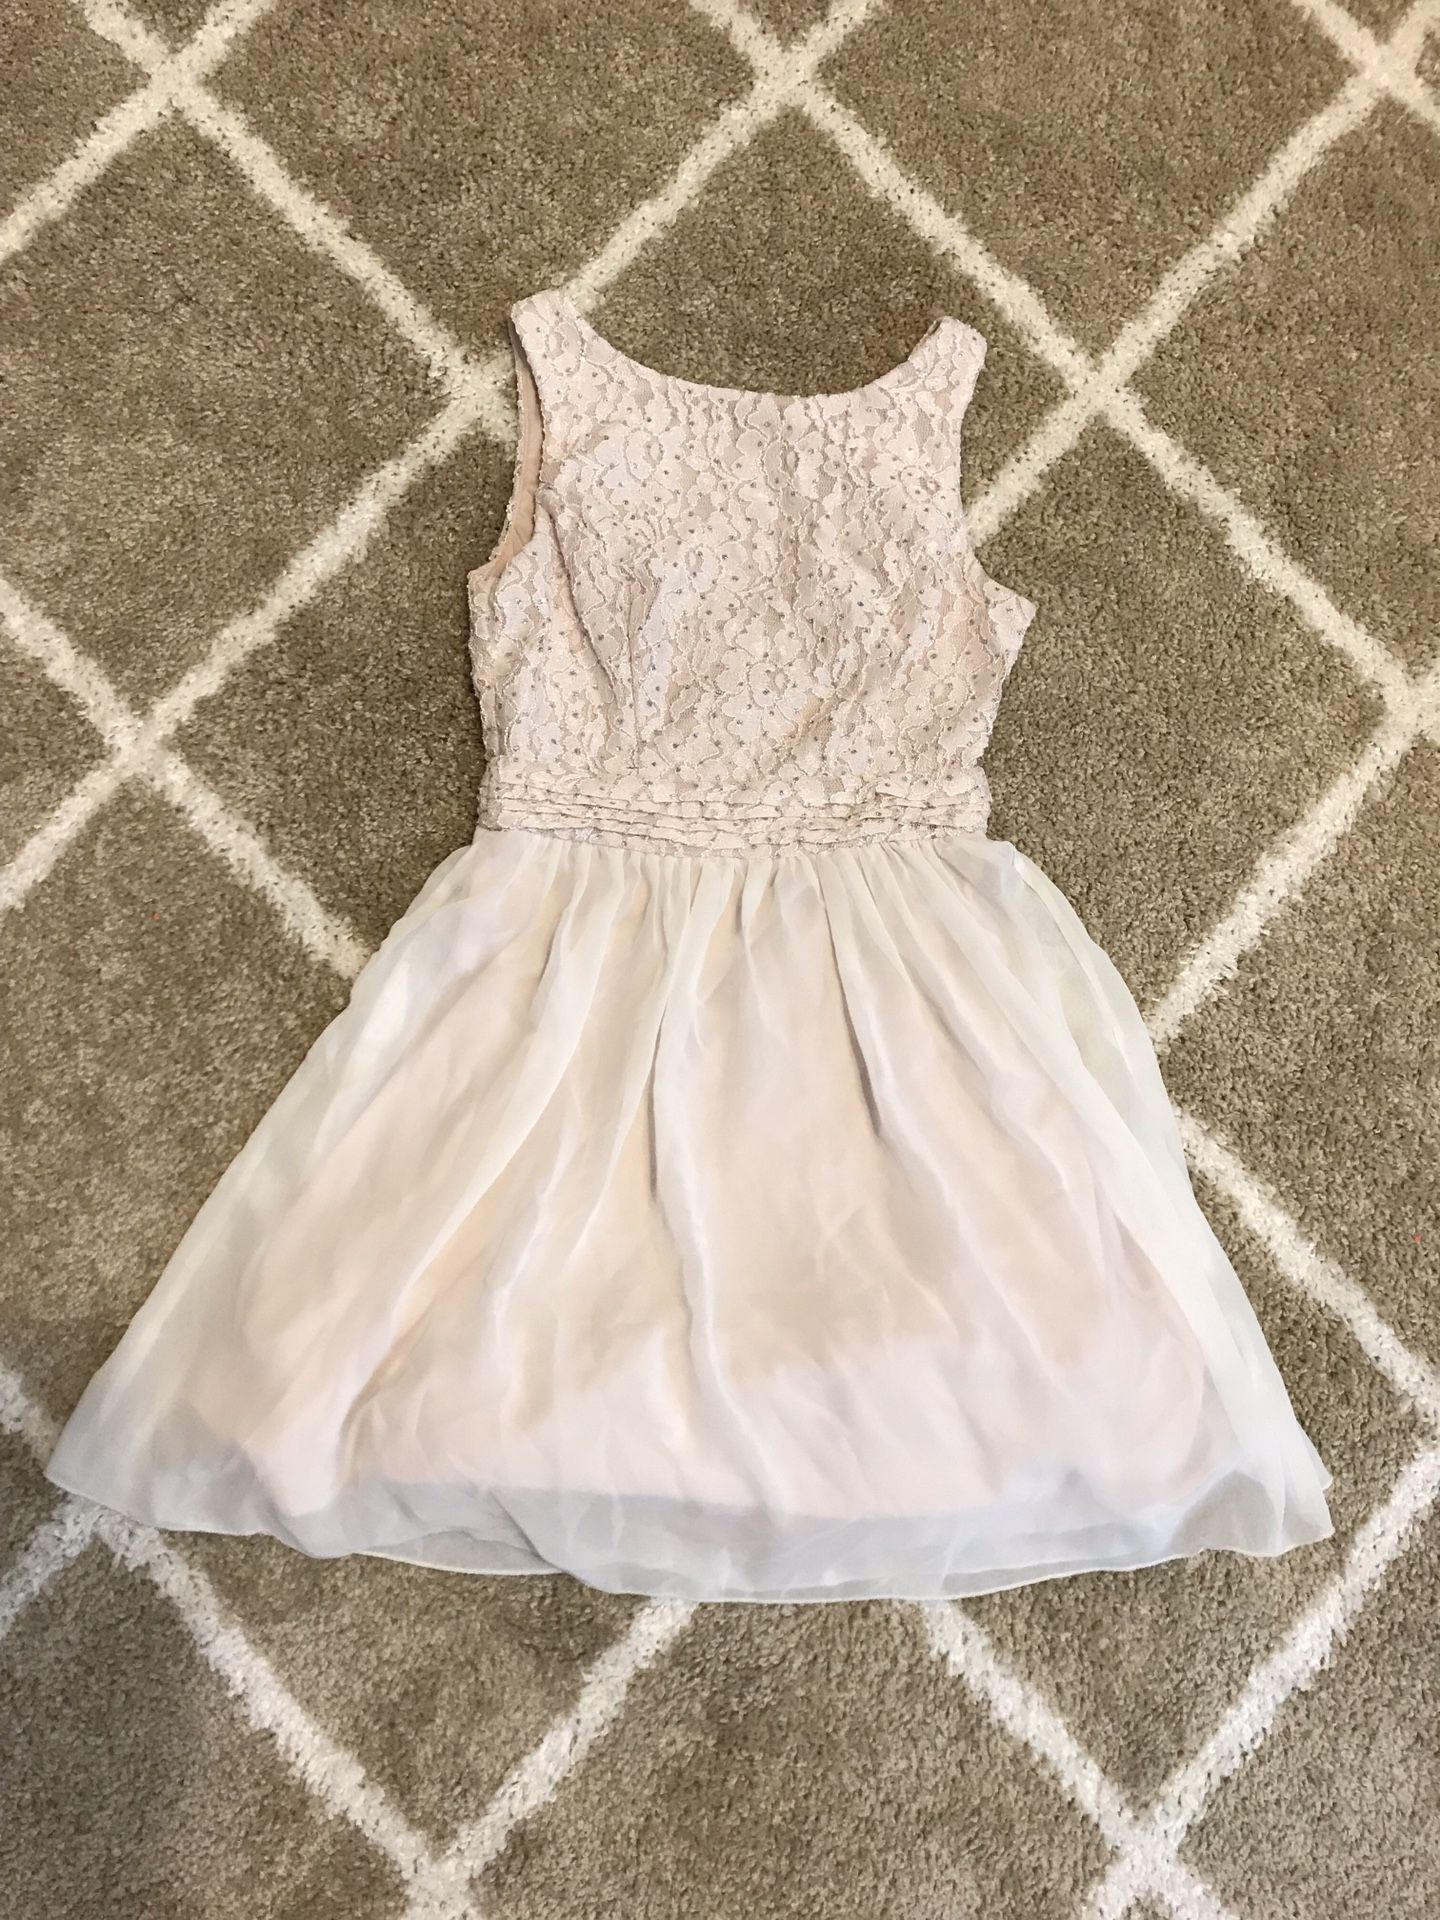 Off-white short homecoming/prom dress